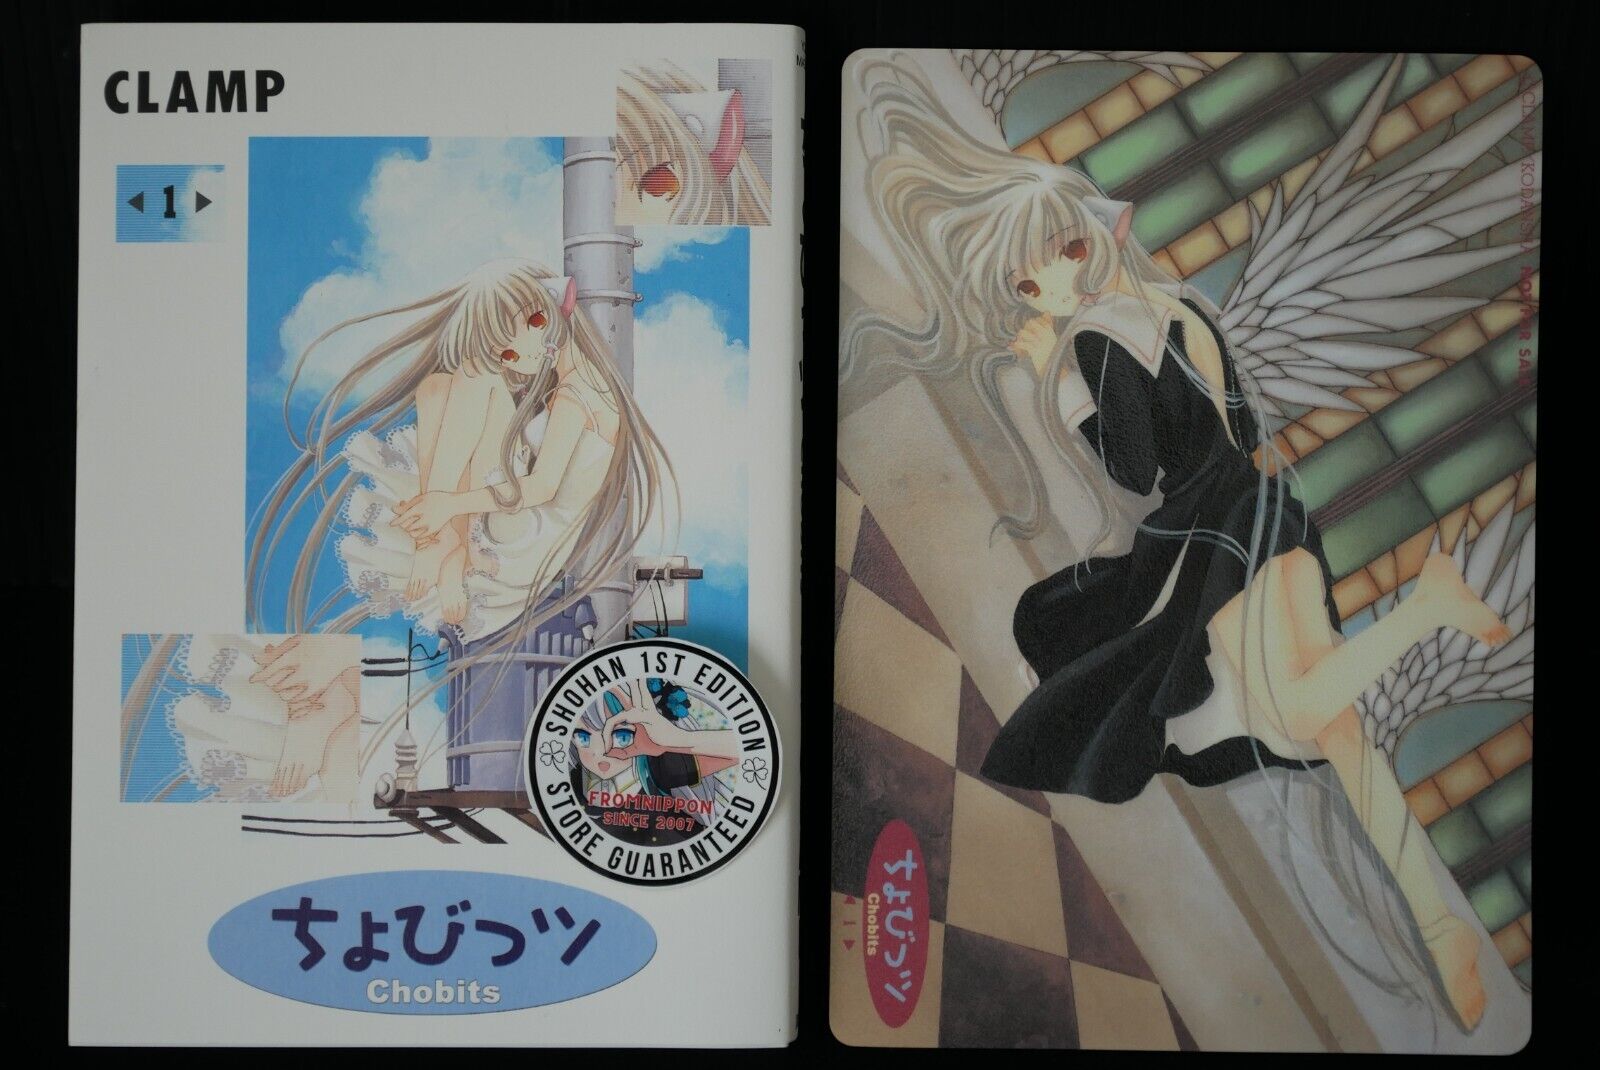 SHOHAN OOP: Chobits Vol.1 Manga Limited Edition by CLAMP - from Japan